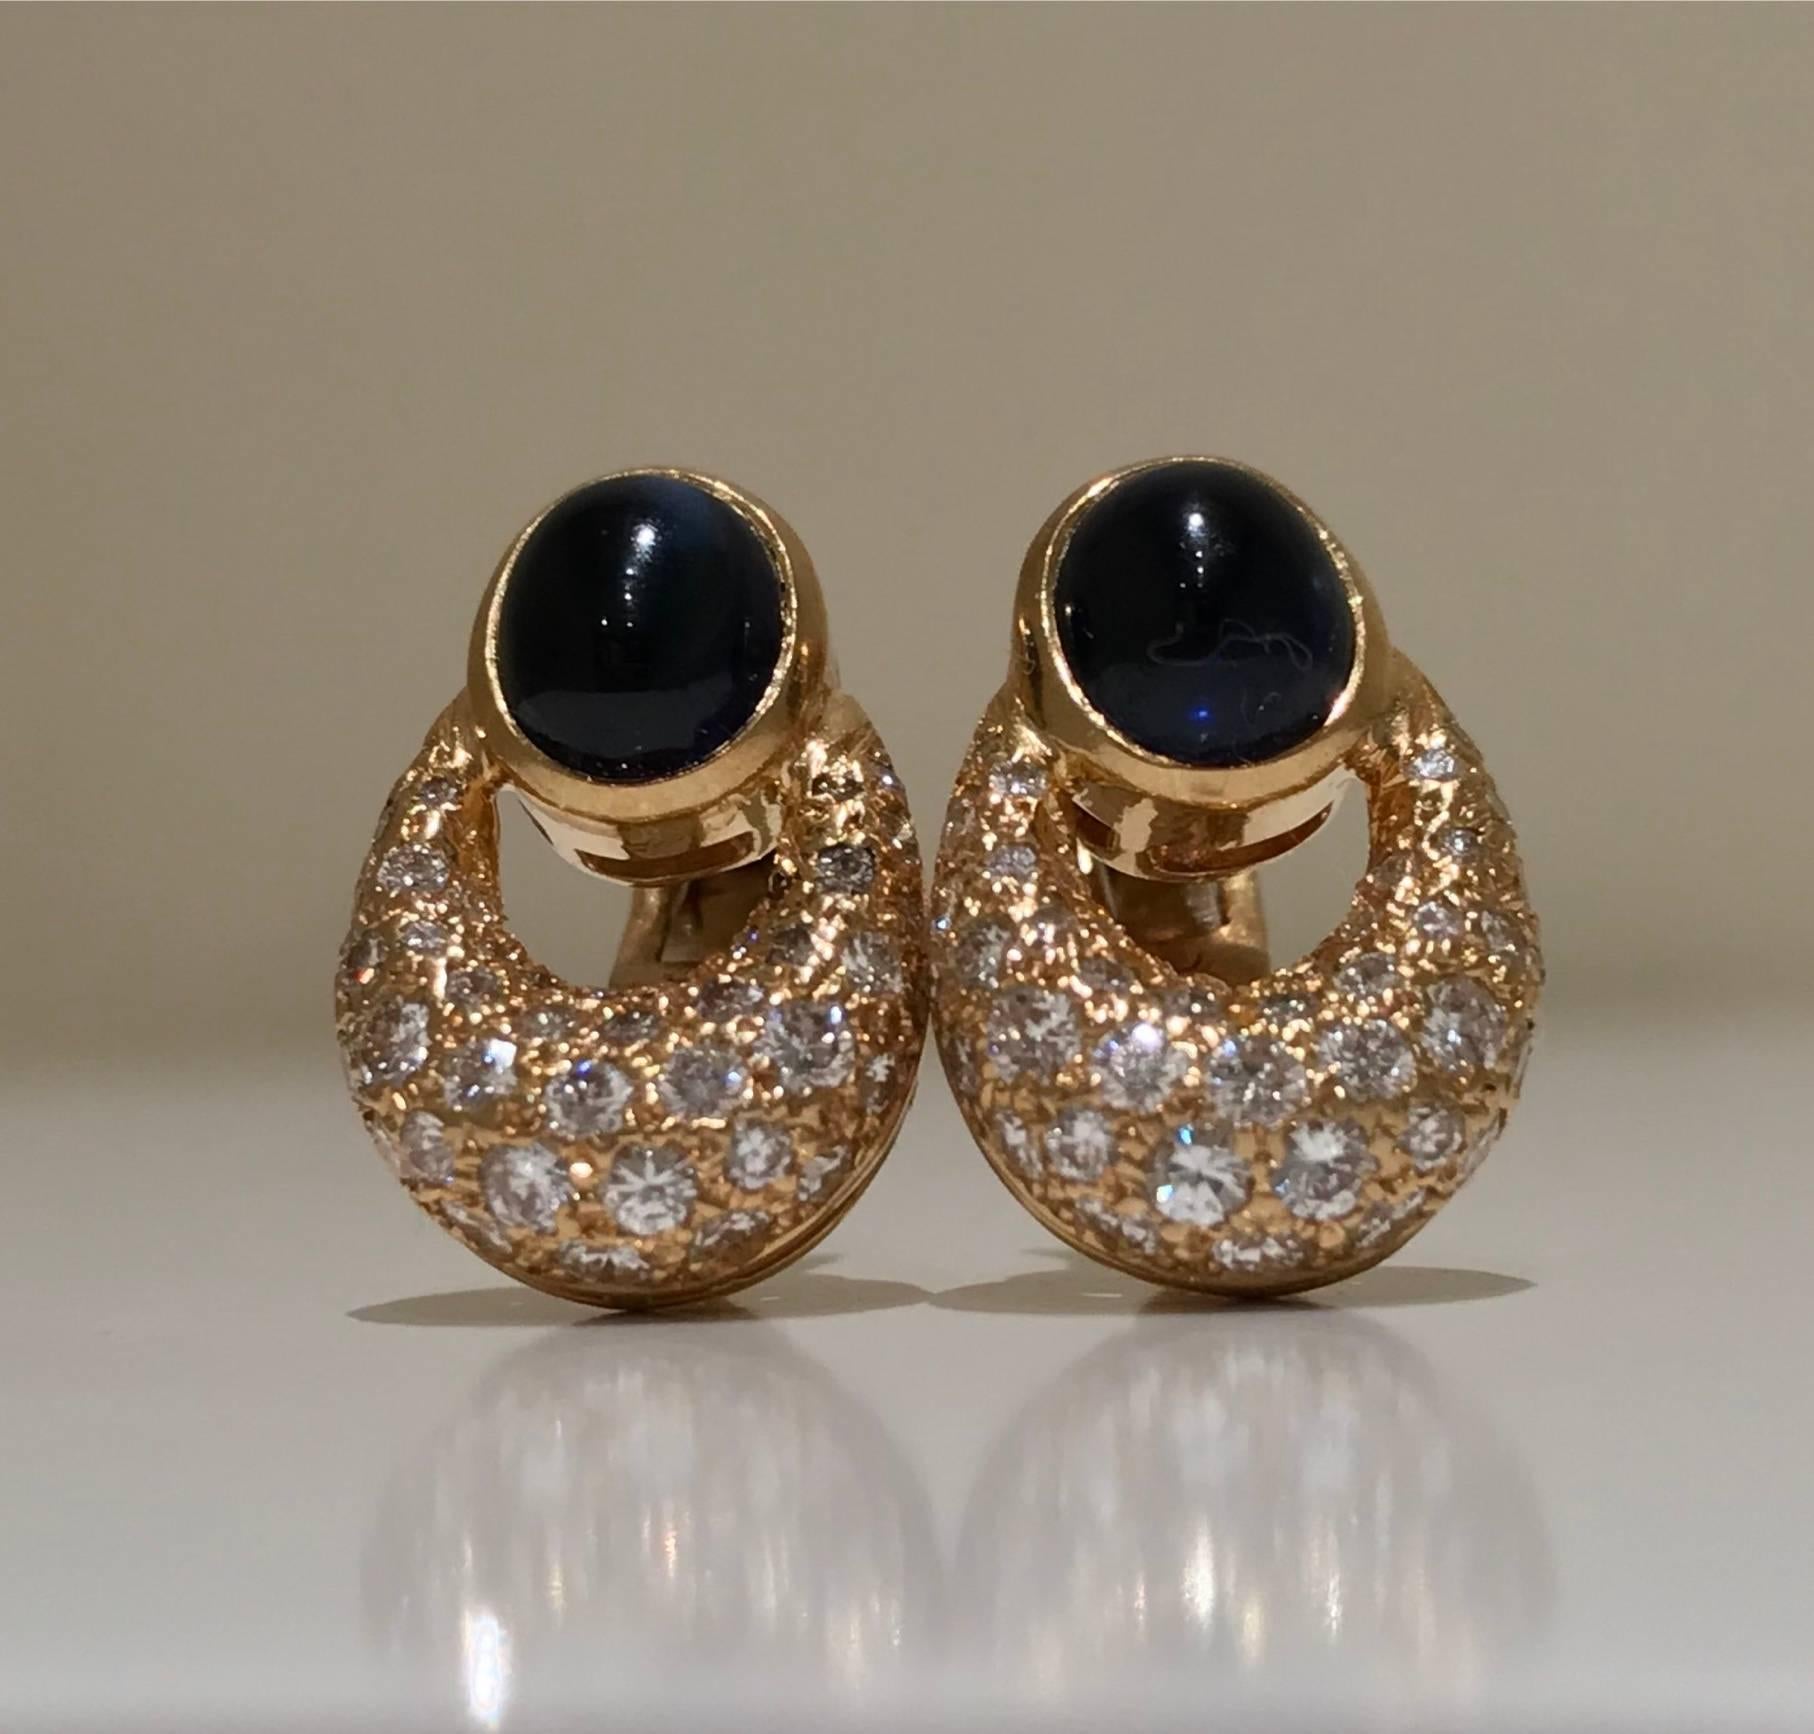 
A pair of sapphire and diamond earrings  by Cartier set in 18k yellow gold. Each earring features a cabochon sapphire in a rub over setting of pave set brilliant cut diamond hoops
Diamond weight: approximately 0.70 carats total
Sapphires: approx